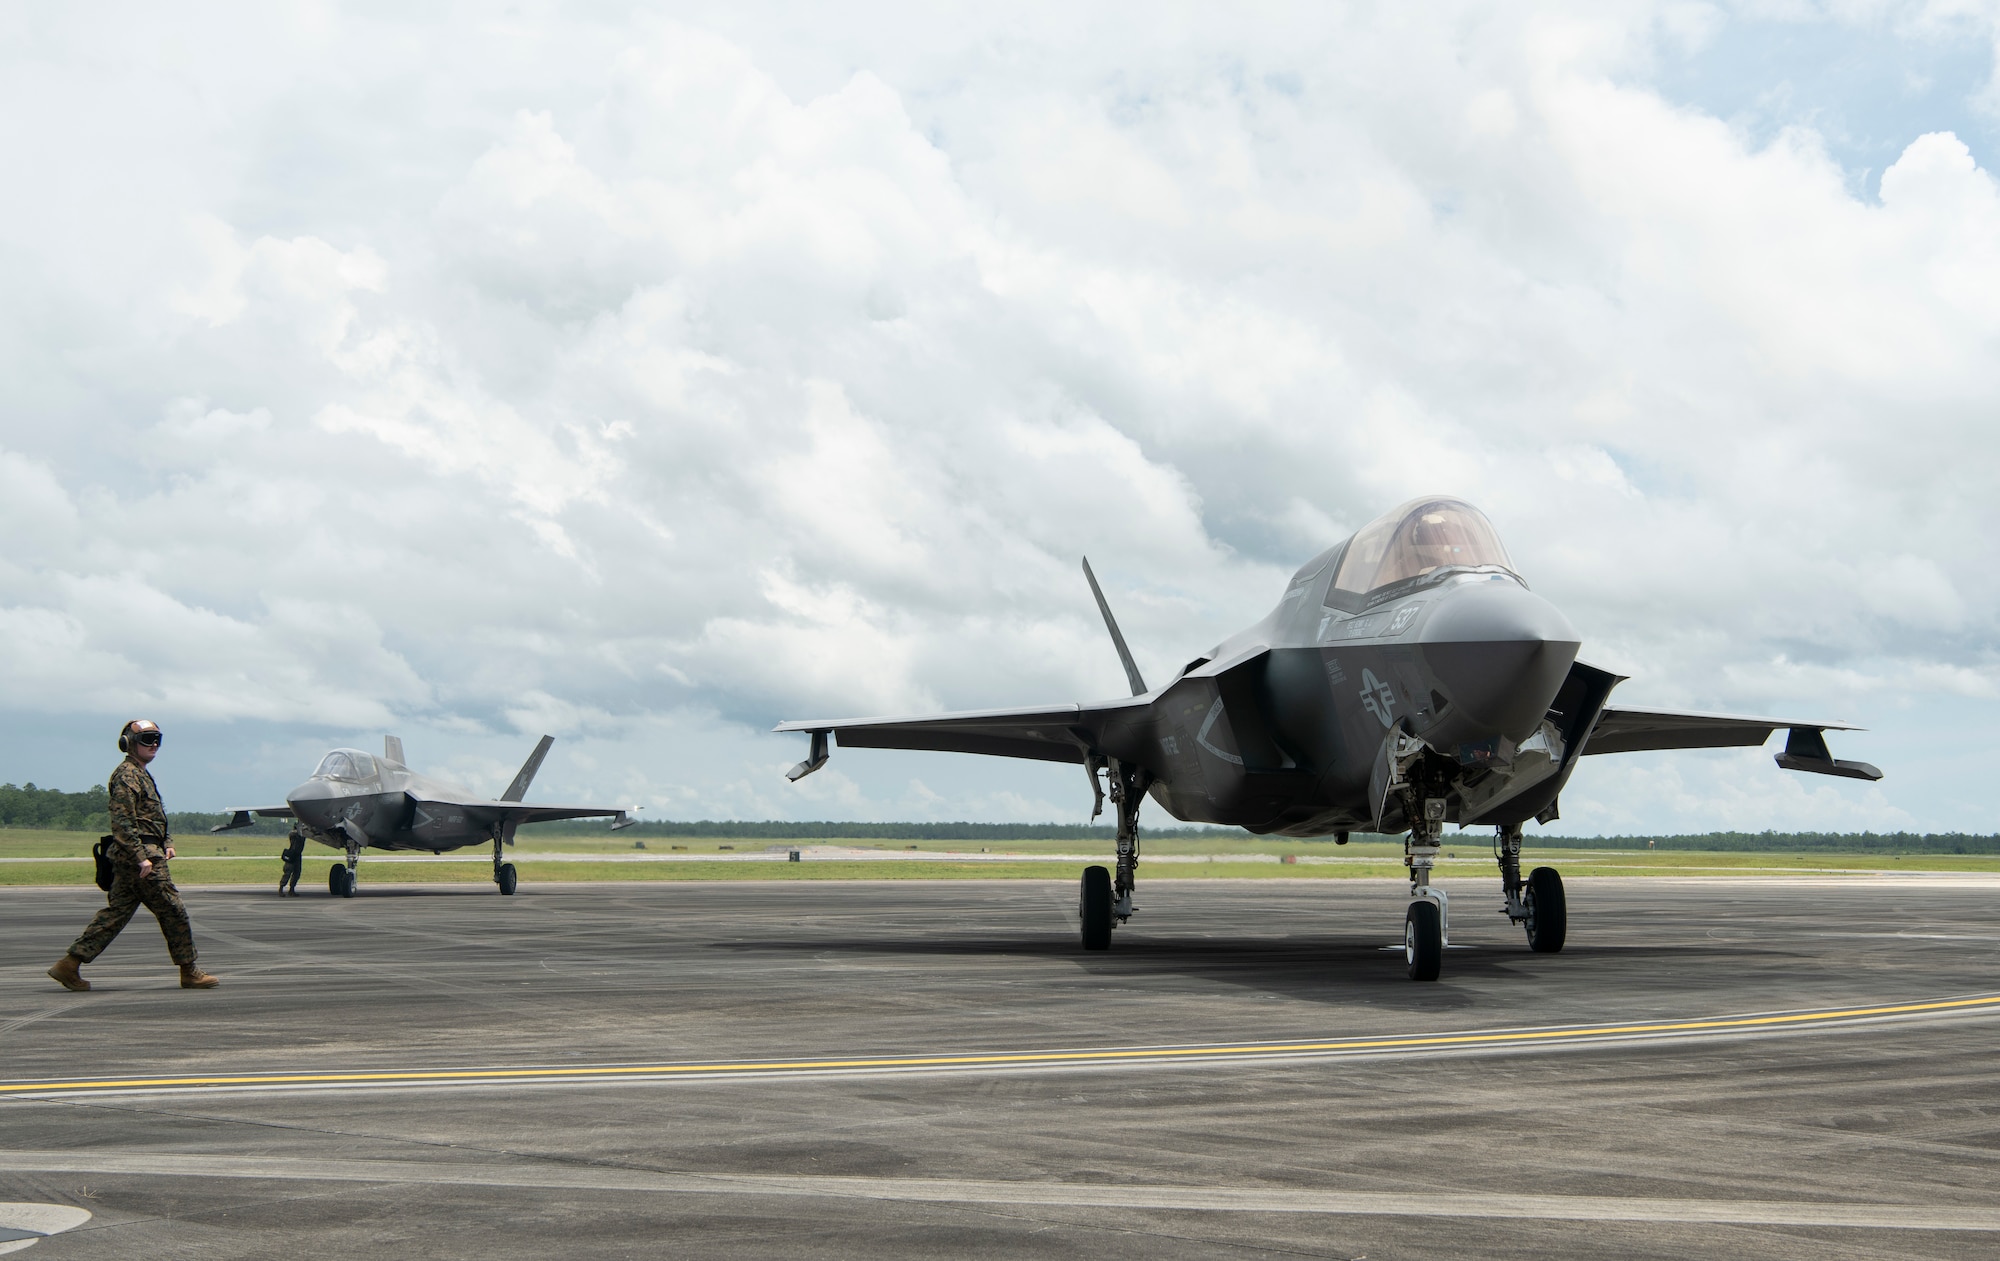 A U.S. Marine marshals in an F-35B Lightning II after a forward arming and refueling point, or FARP, demonstration at Duke Field, Florida, July 21, 2021. Capabilities like FARP ensure Airmen have multiple tools to accomplish a refueling mission in any environment, no matter how austere. (U.S. Air Force photo by Staff Sgt. Janiqua P. Robinson)